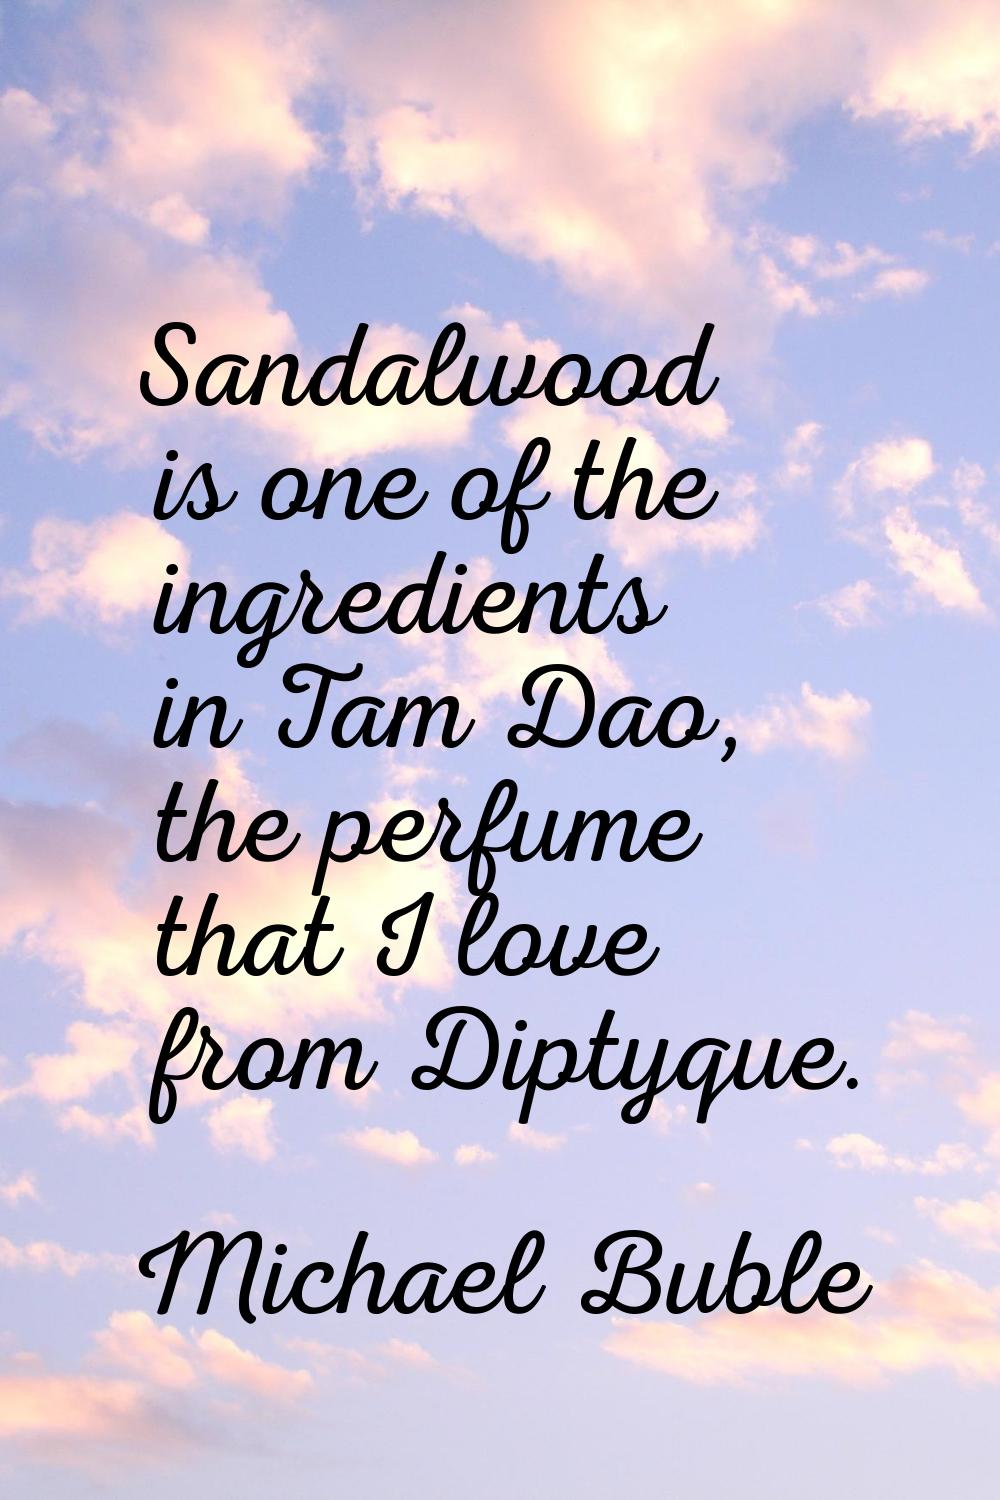 Sandalwood is one of the ingredients in Tam Dao, the perfume that I love from Diptyque.